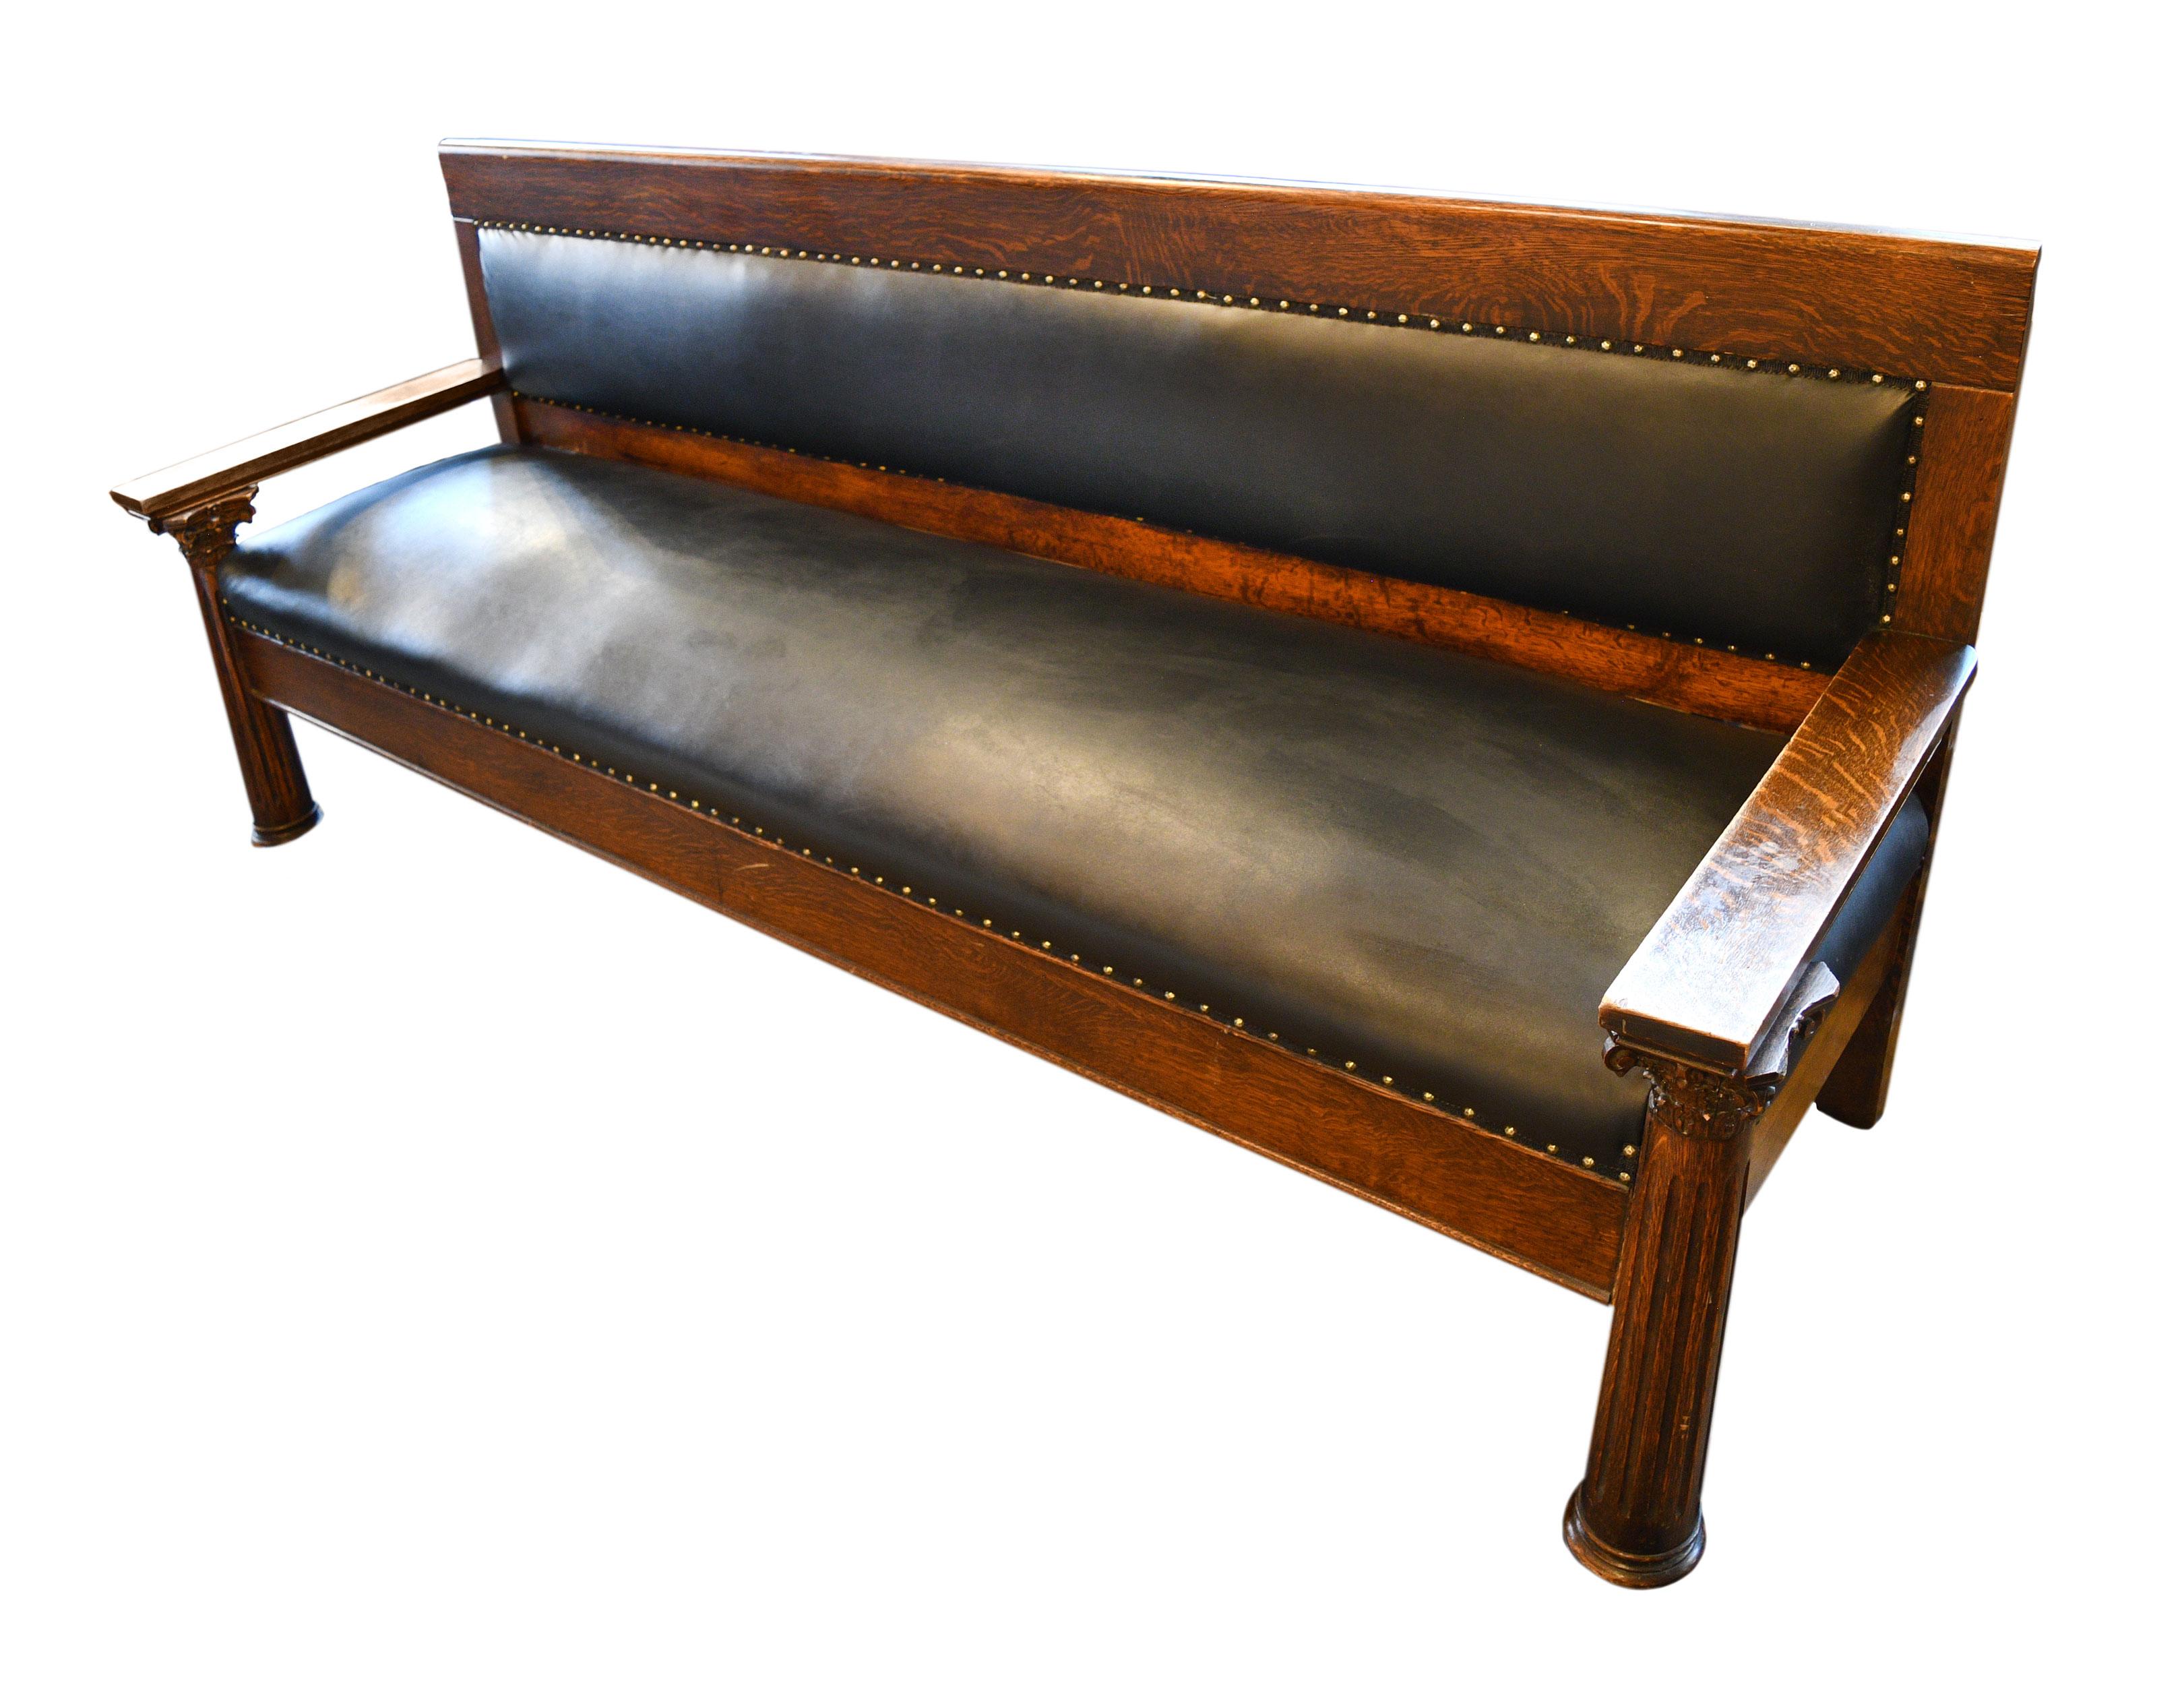 These ultra comfy and stylish upholstered benches feature two lovely hand carved oak columns on each end. At over 8 feet long these benches offer ample seating for you and all your loved ones!

Condition: Good
Finish: Original
Material: Oak/faux